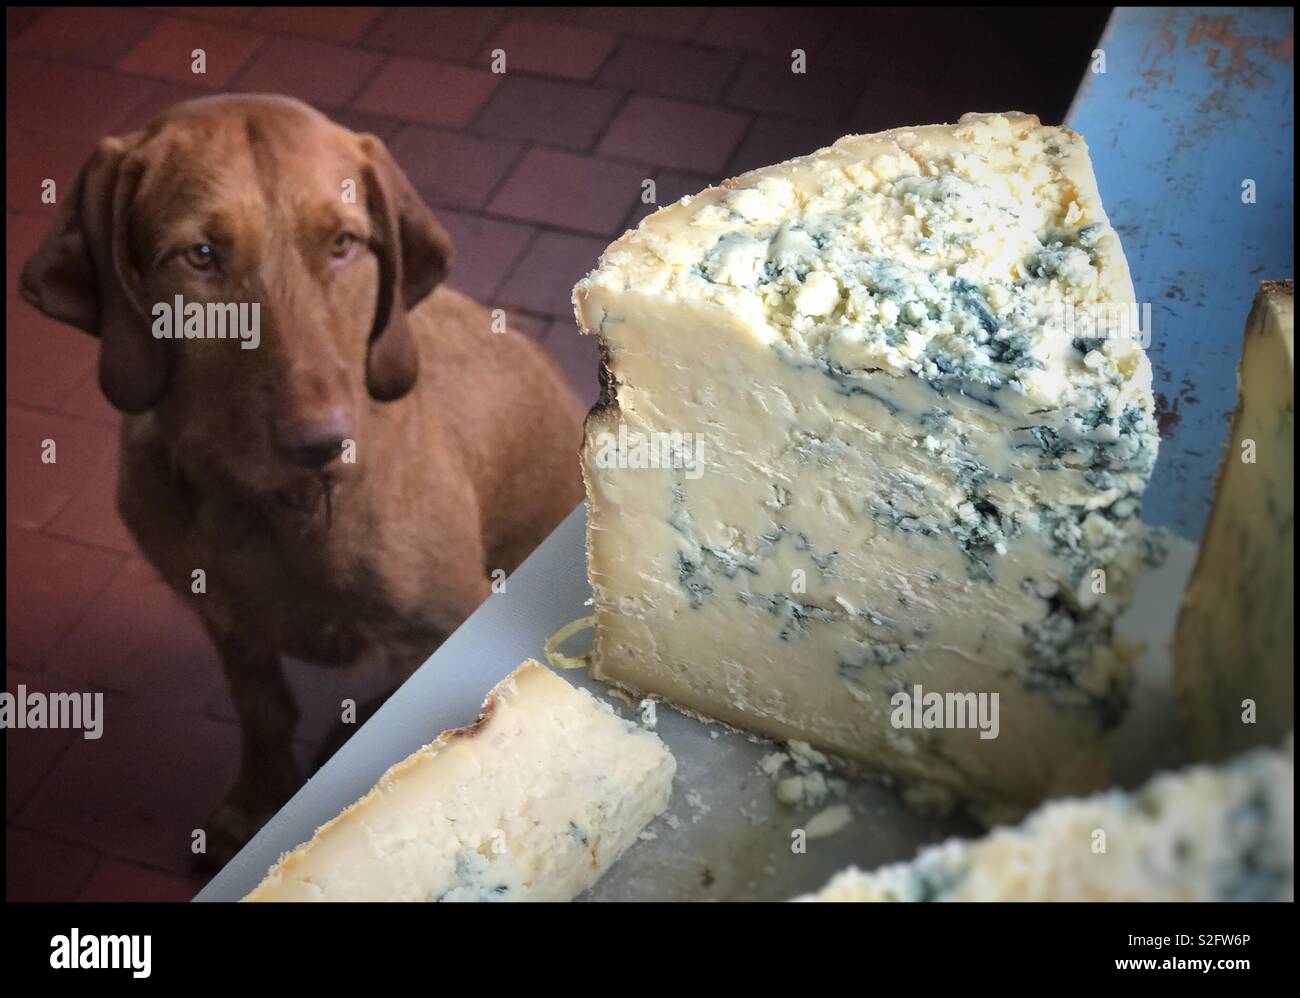 The dog and the cheese Stock Photo